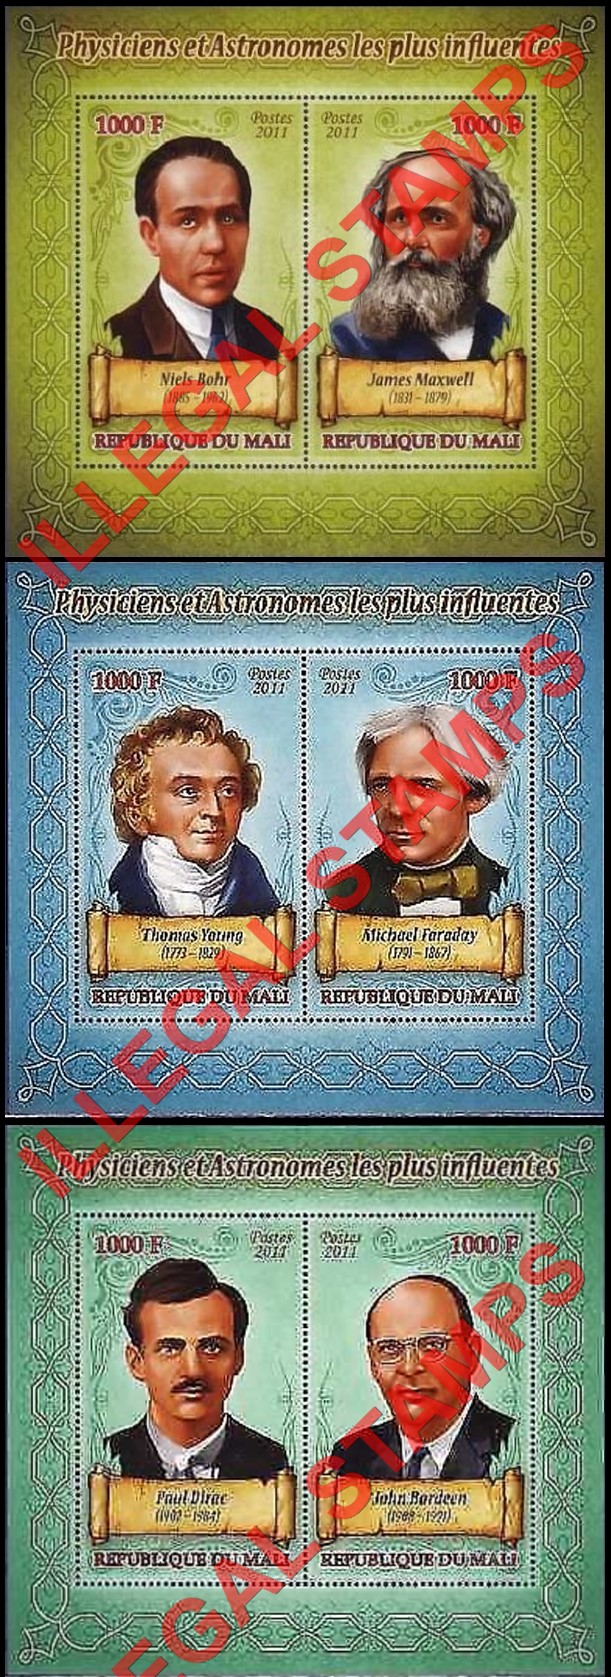 Mali 2011 Physicians and Astronomers Illegal Stamp Souvenir Sheets of 2 (Part 1)